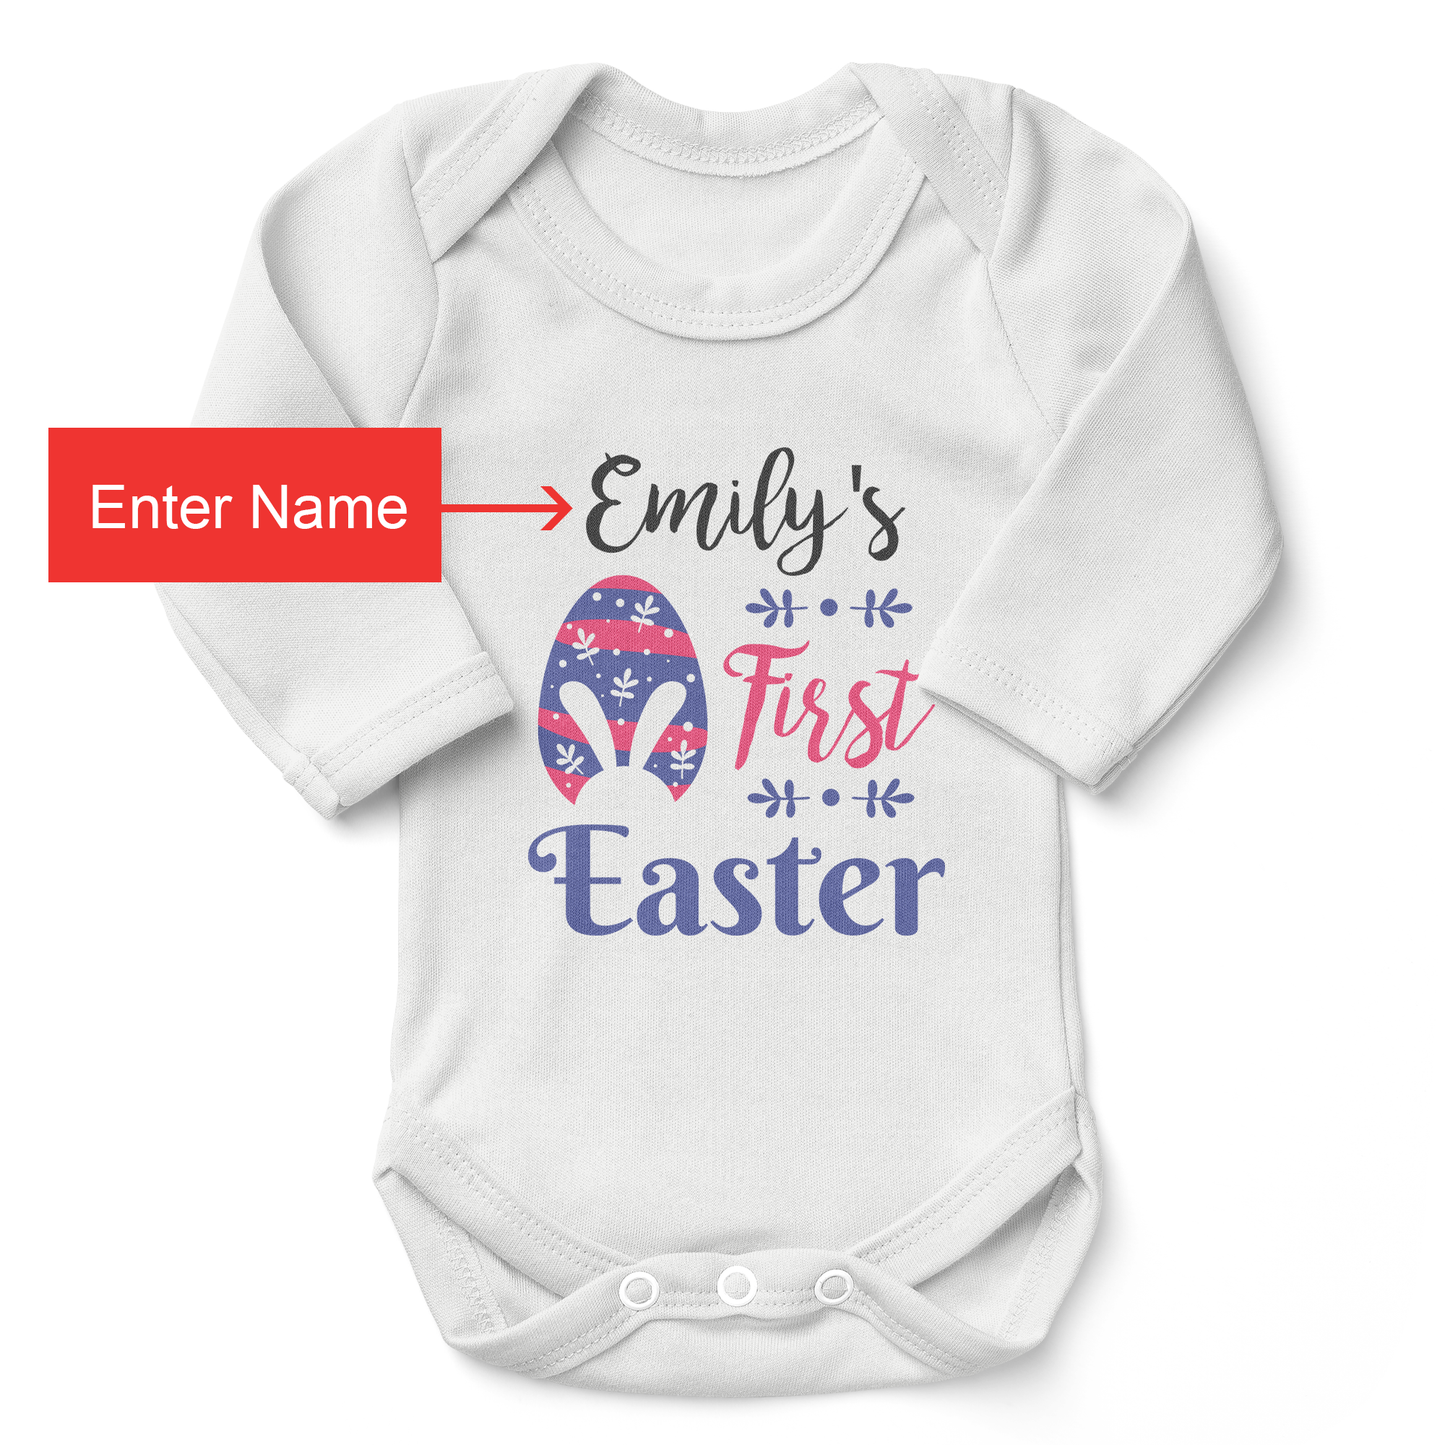 [Personalized] My First Easter Organic Baby Bodysuit (Girl)